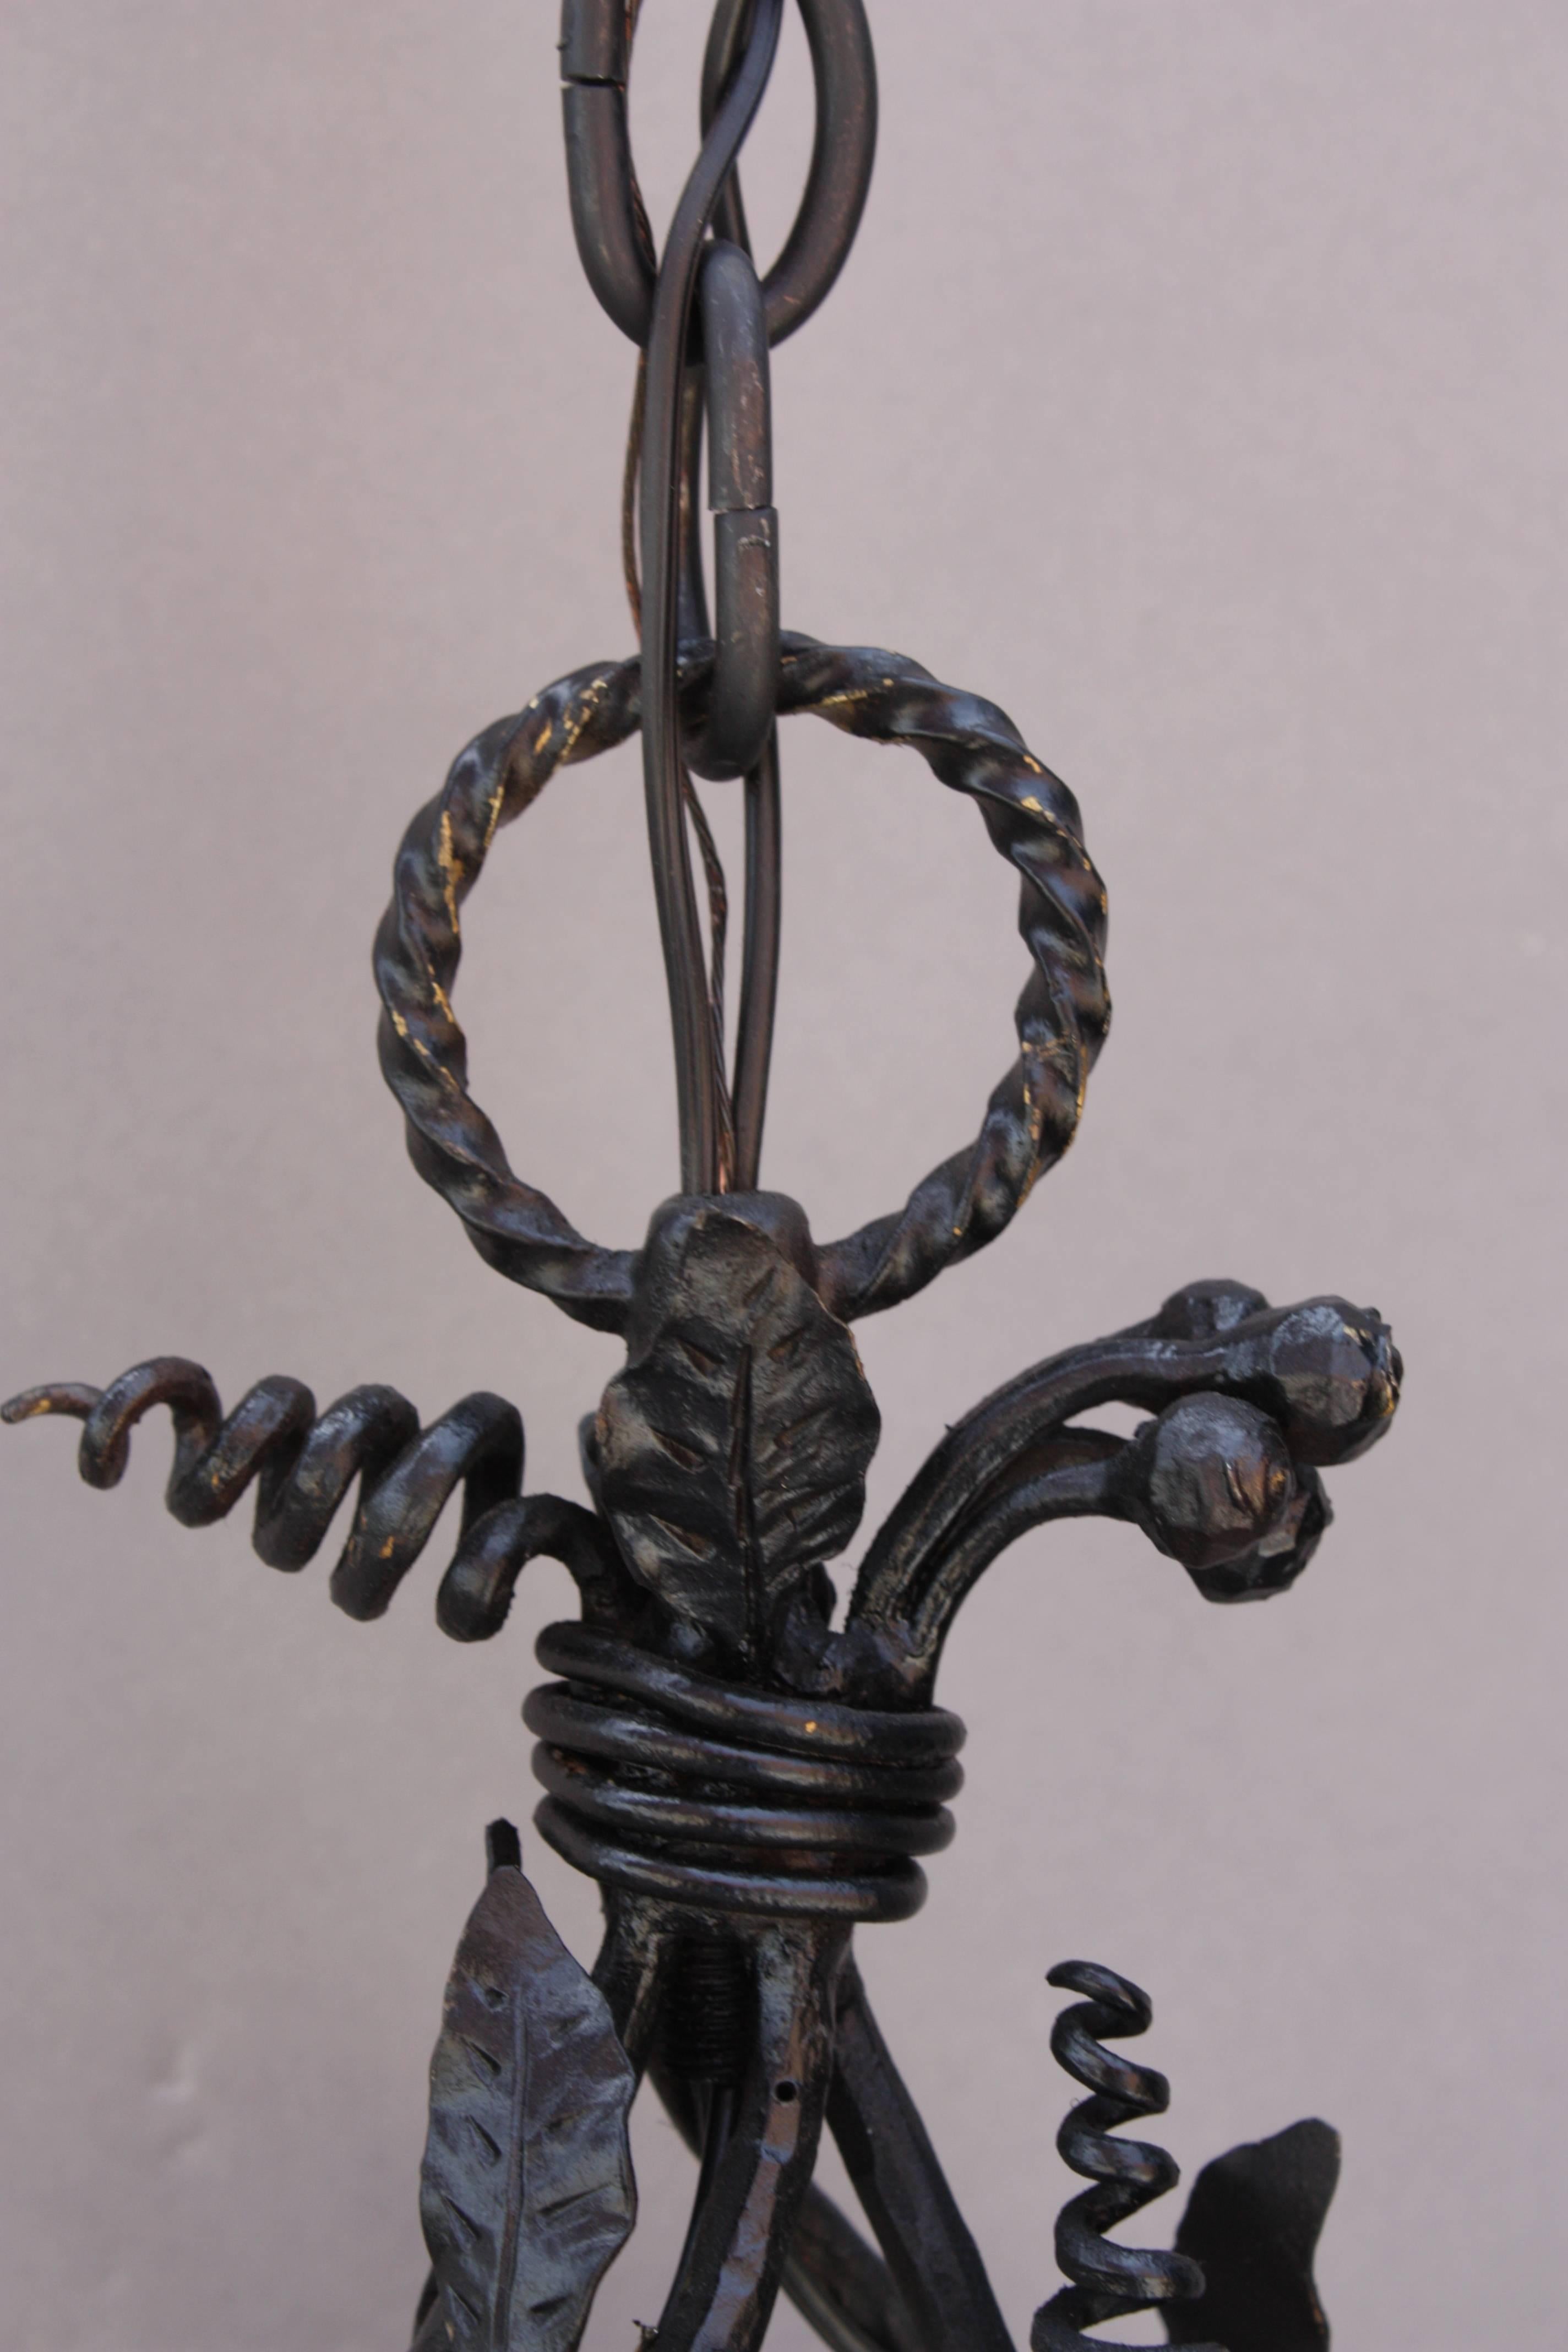 Unusually narrow and tall wrought iron chandelier with intricate vine-like design. Very nicely crafted with nice attention to detail.

Measures: 30